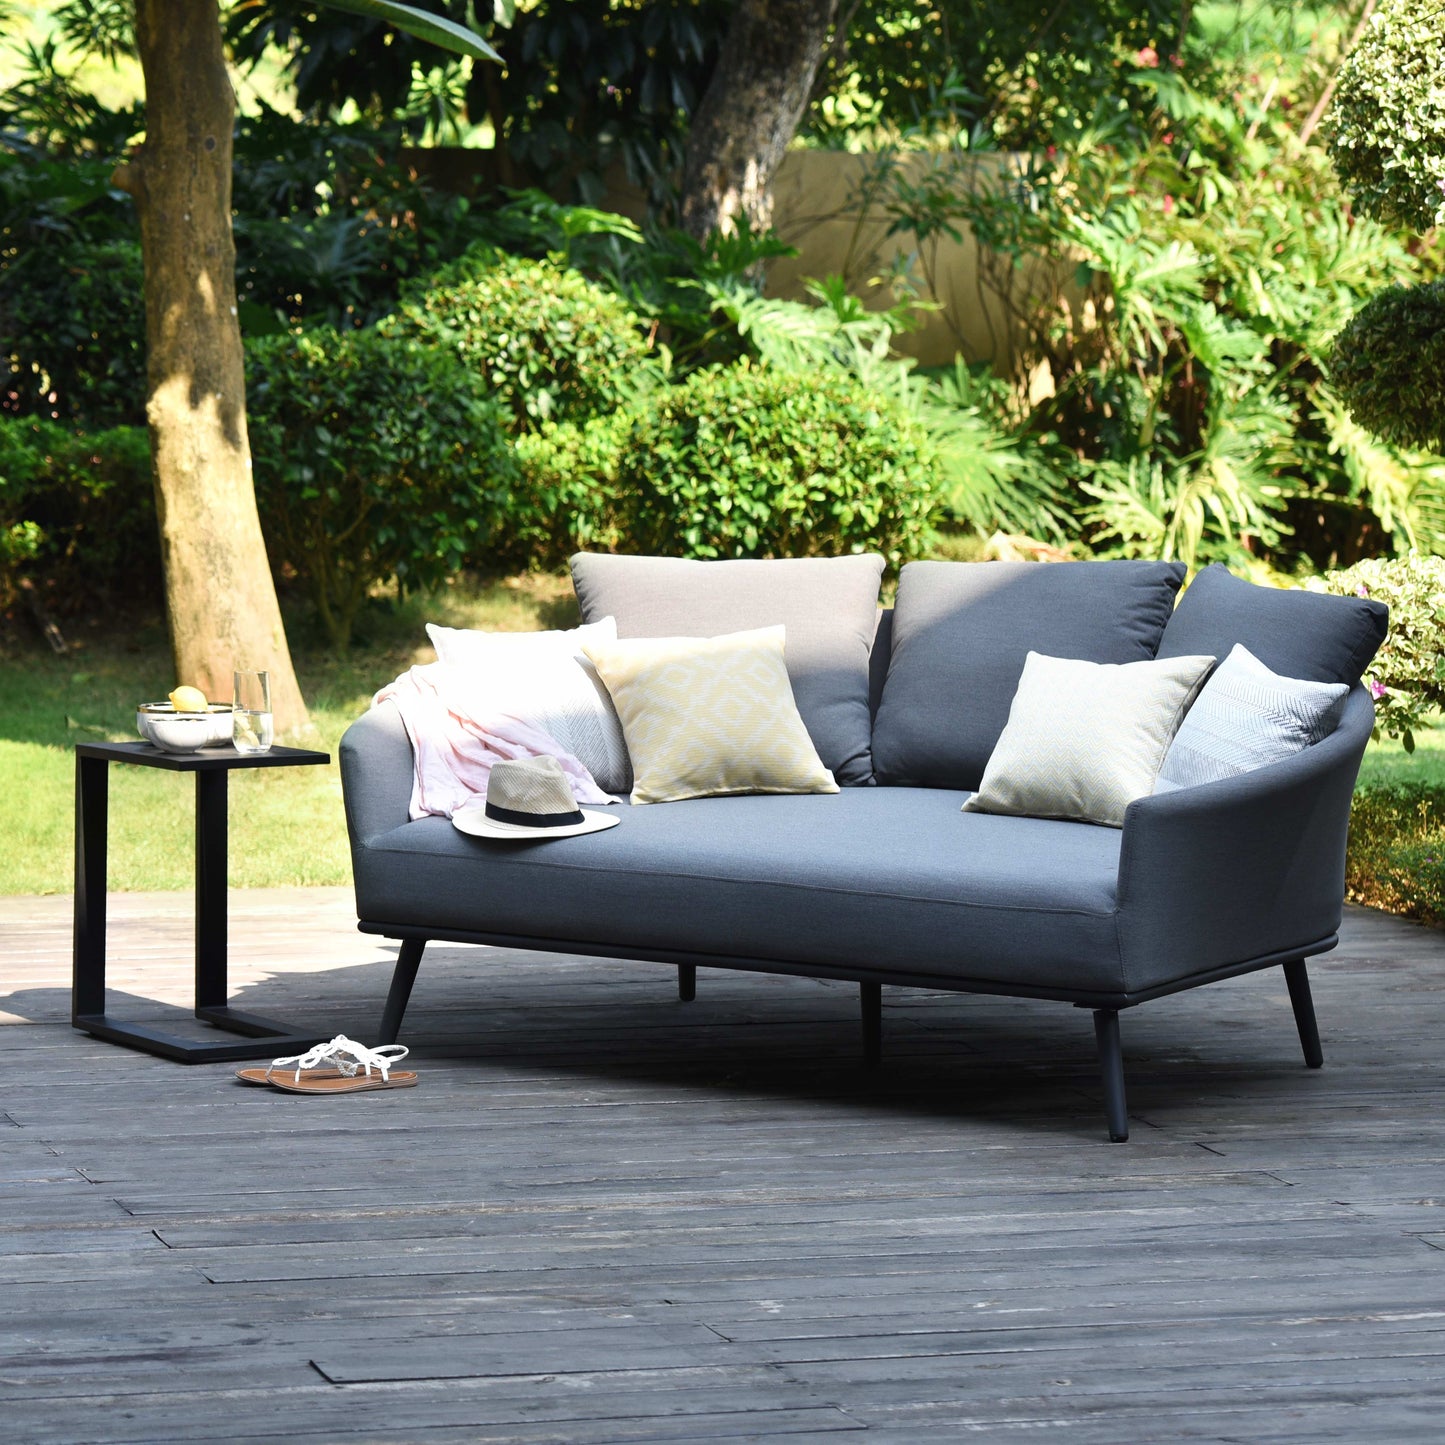 Outdoor Fabric Ark Daybed